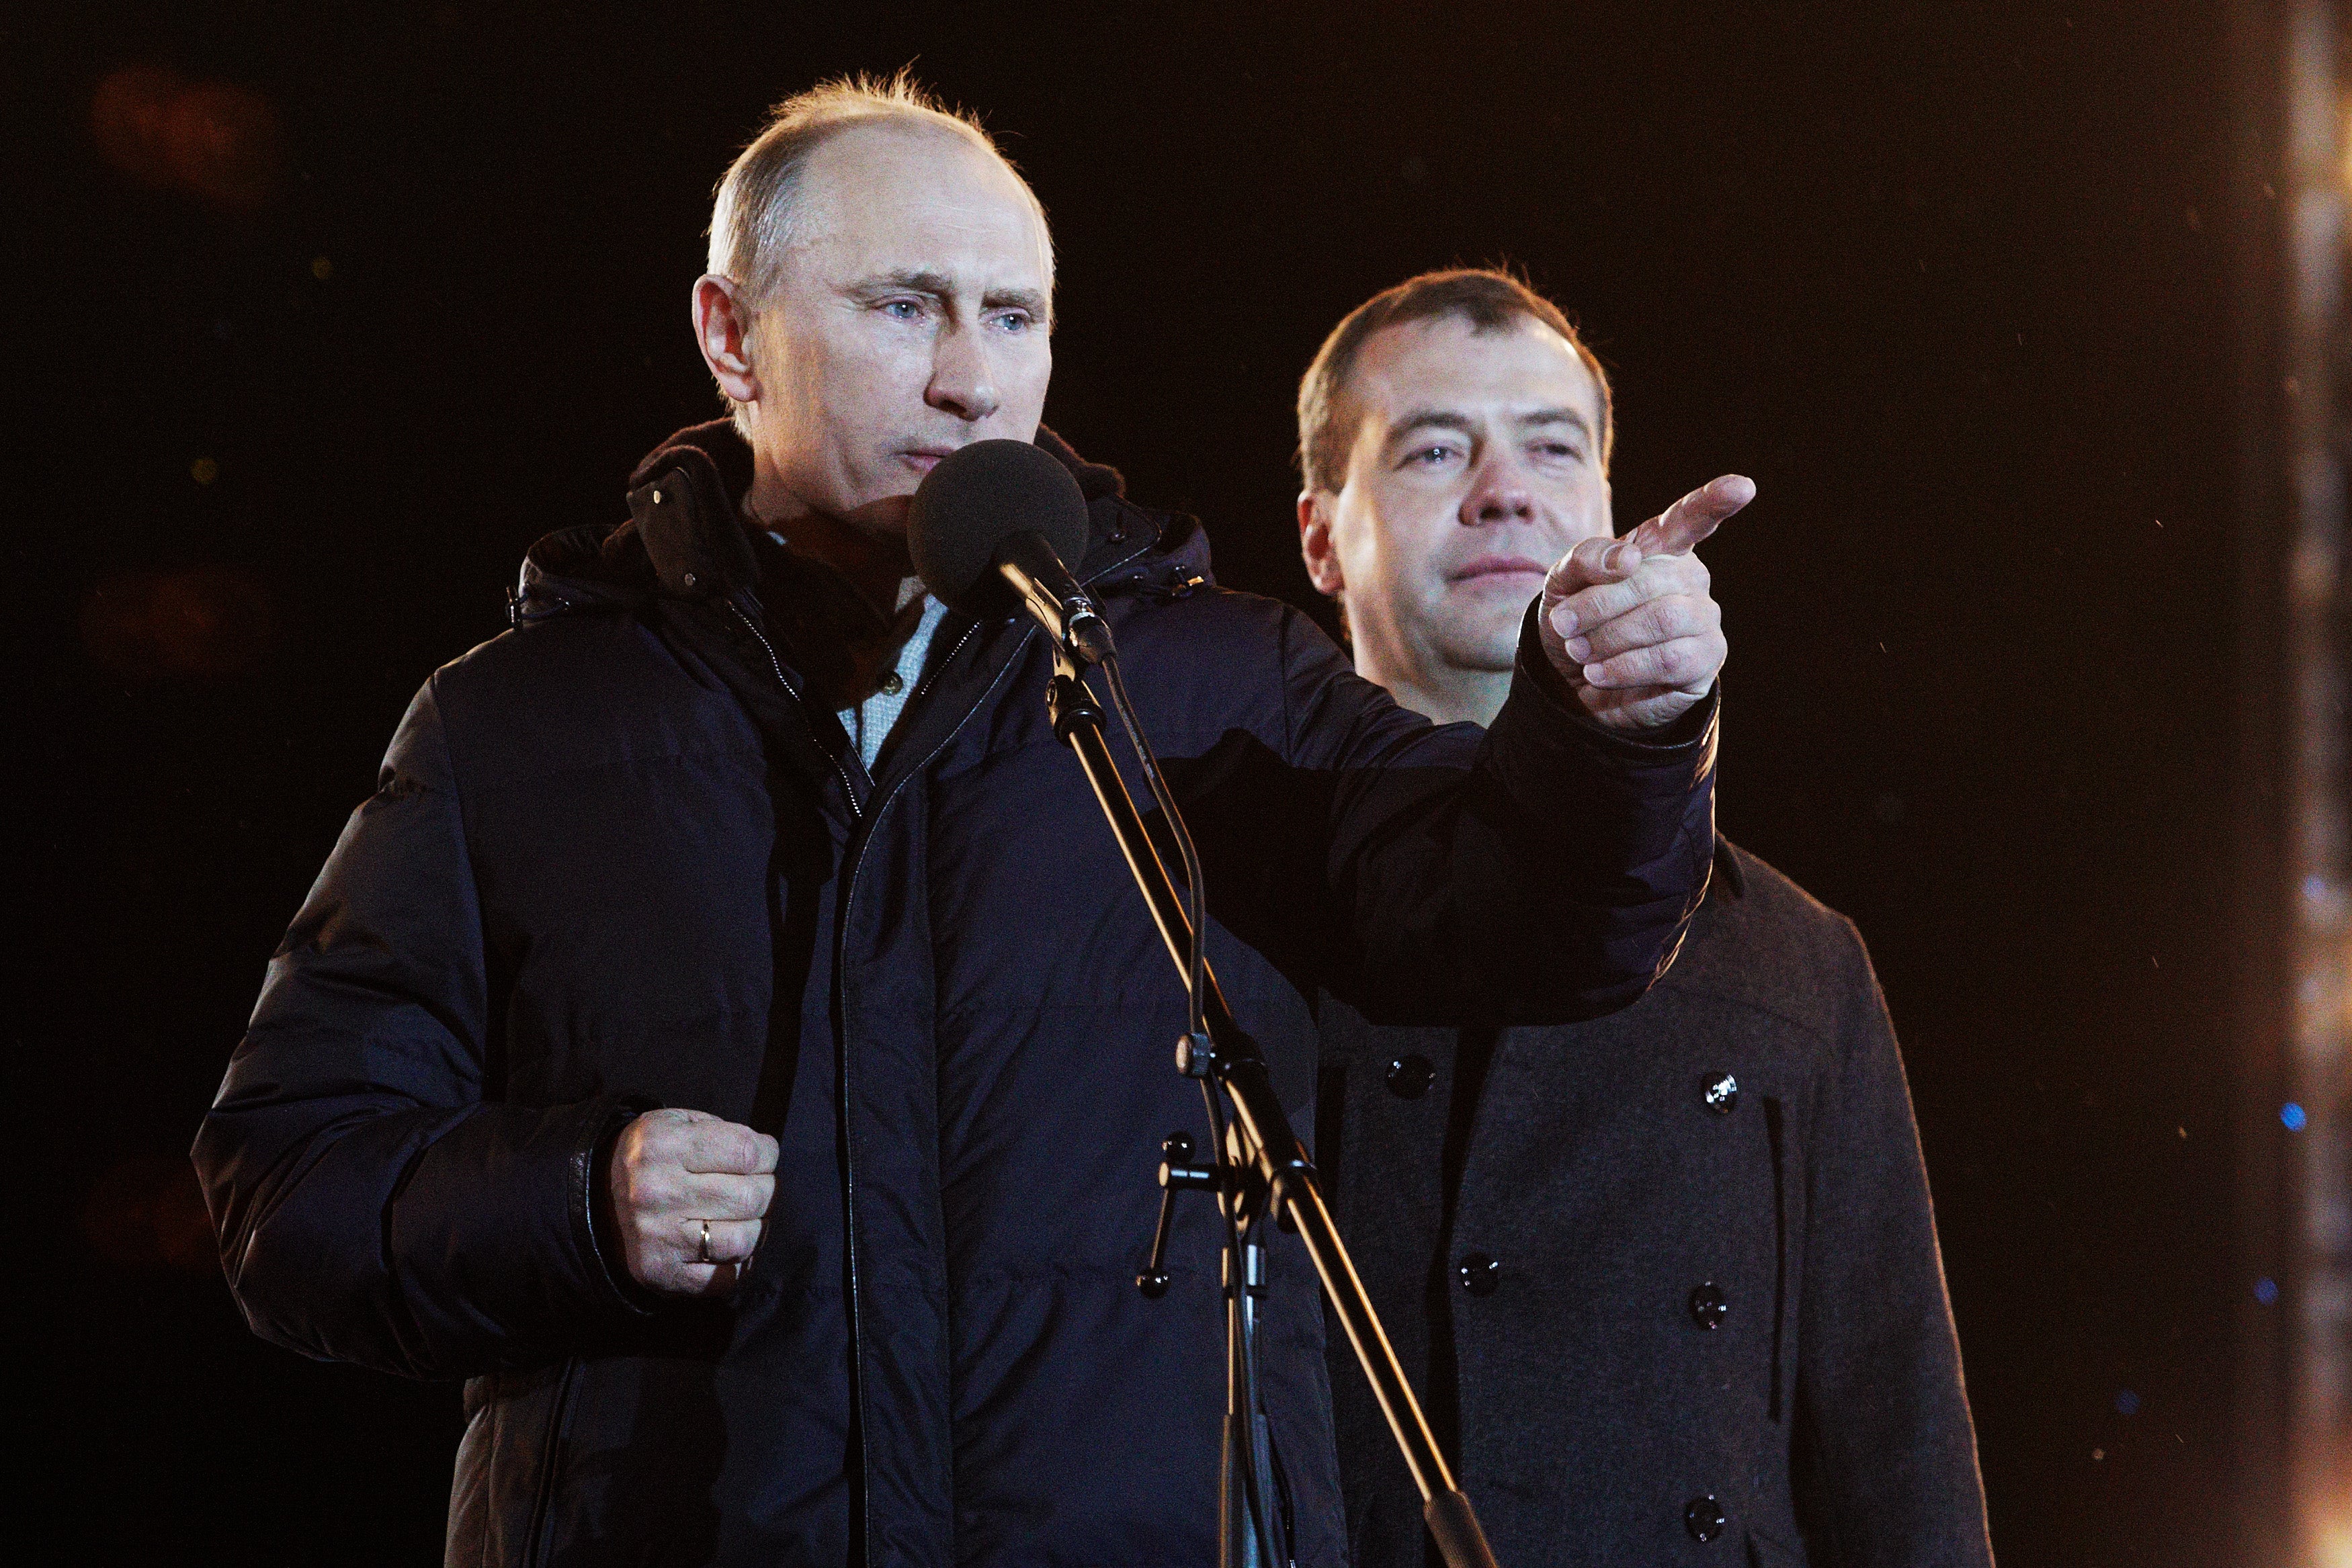 File: Russian president Vladimir Putin speaks as Dmitry Medvedev (R) listens during a rally after Putin claimed victory in the presidential election in Moscow in 2012